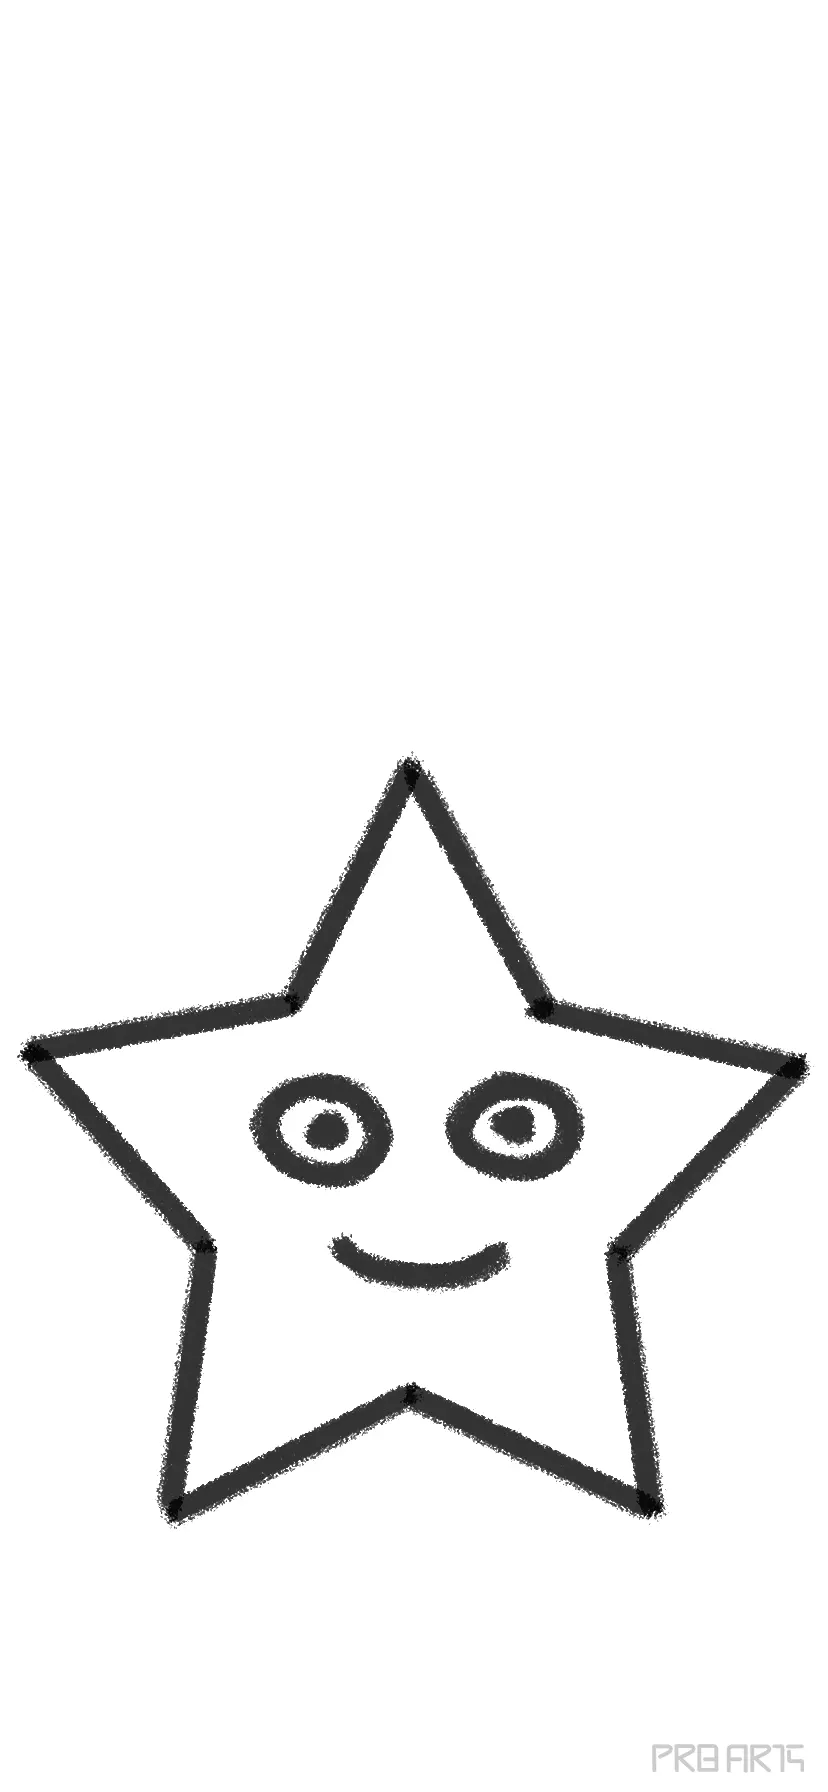 How to Draw A Cartoon Star - Easy Drawing for Kids - PRB ARTS